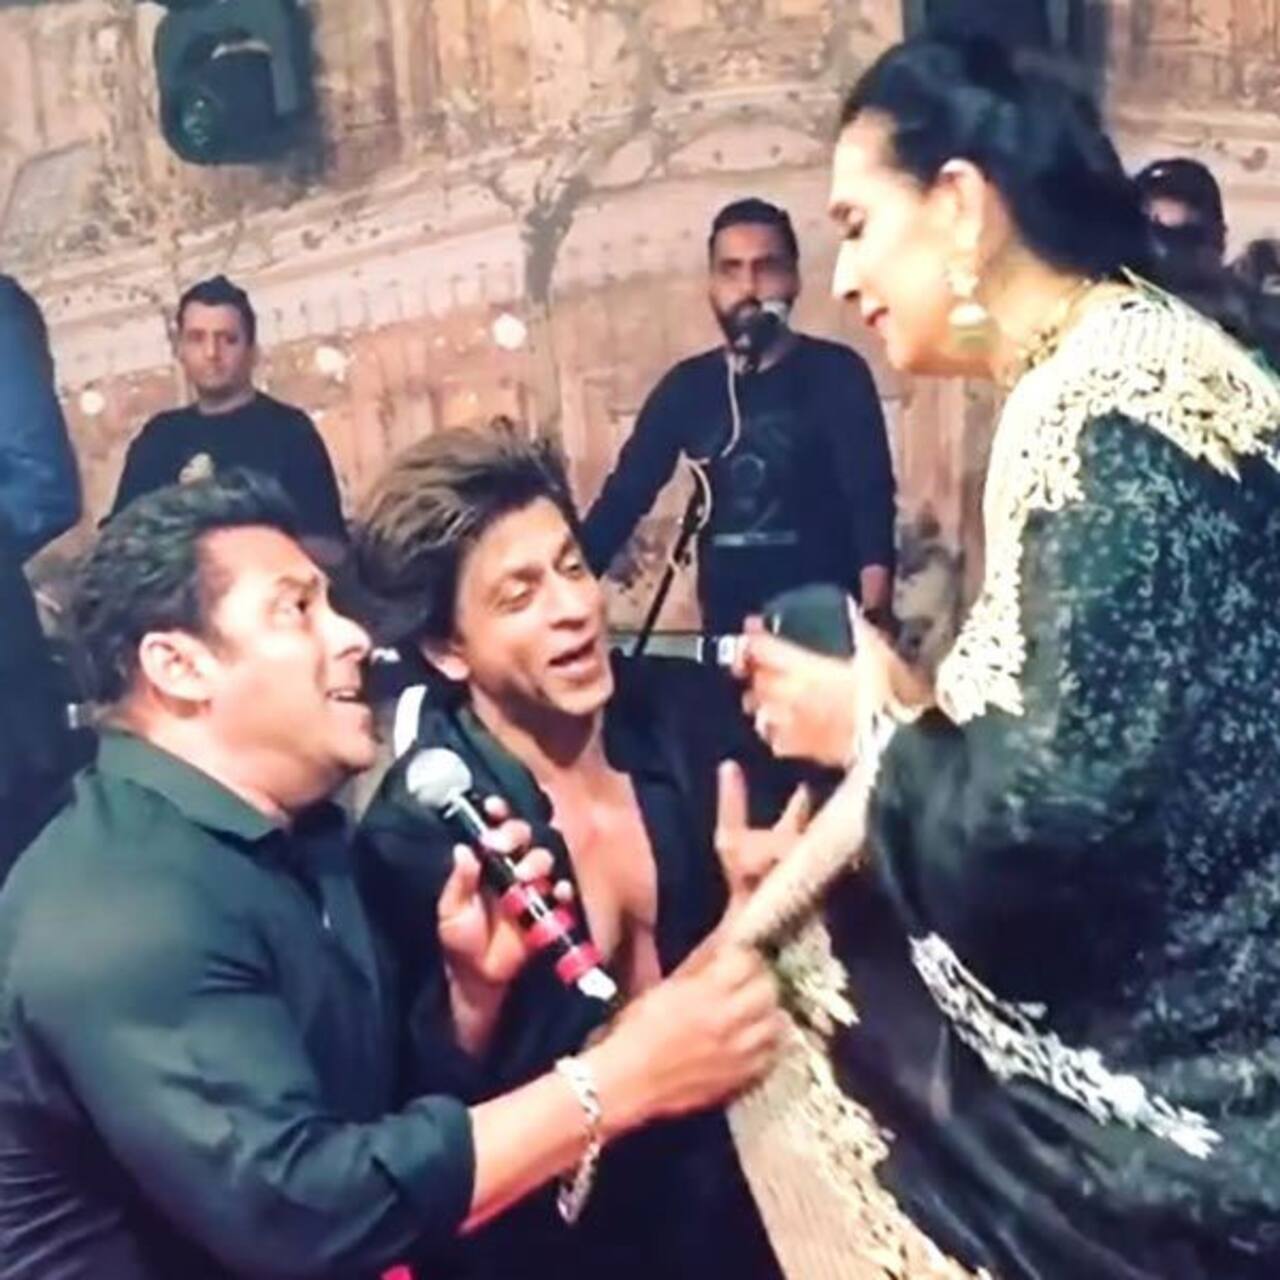 Sonam Kapoor's wedding was a helluva night to remember when Shah Rukh Khan and Salman Khan went uncontrollably on the dance floor.